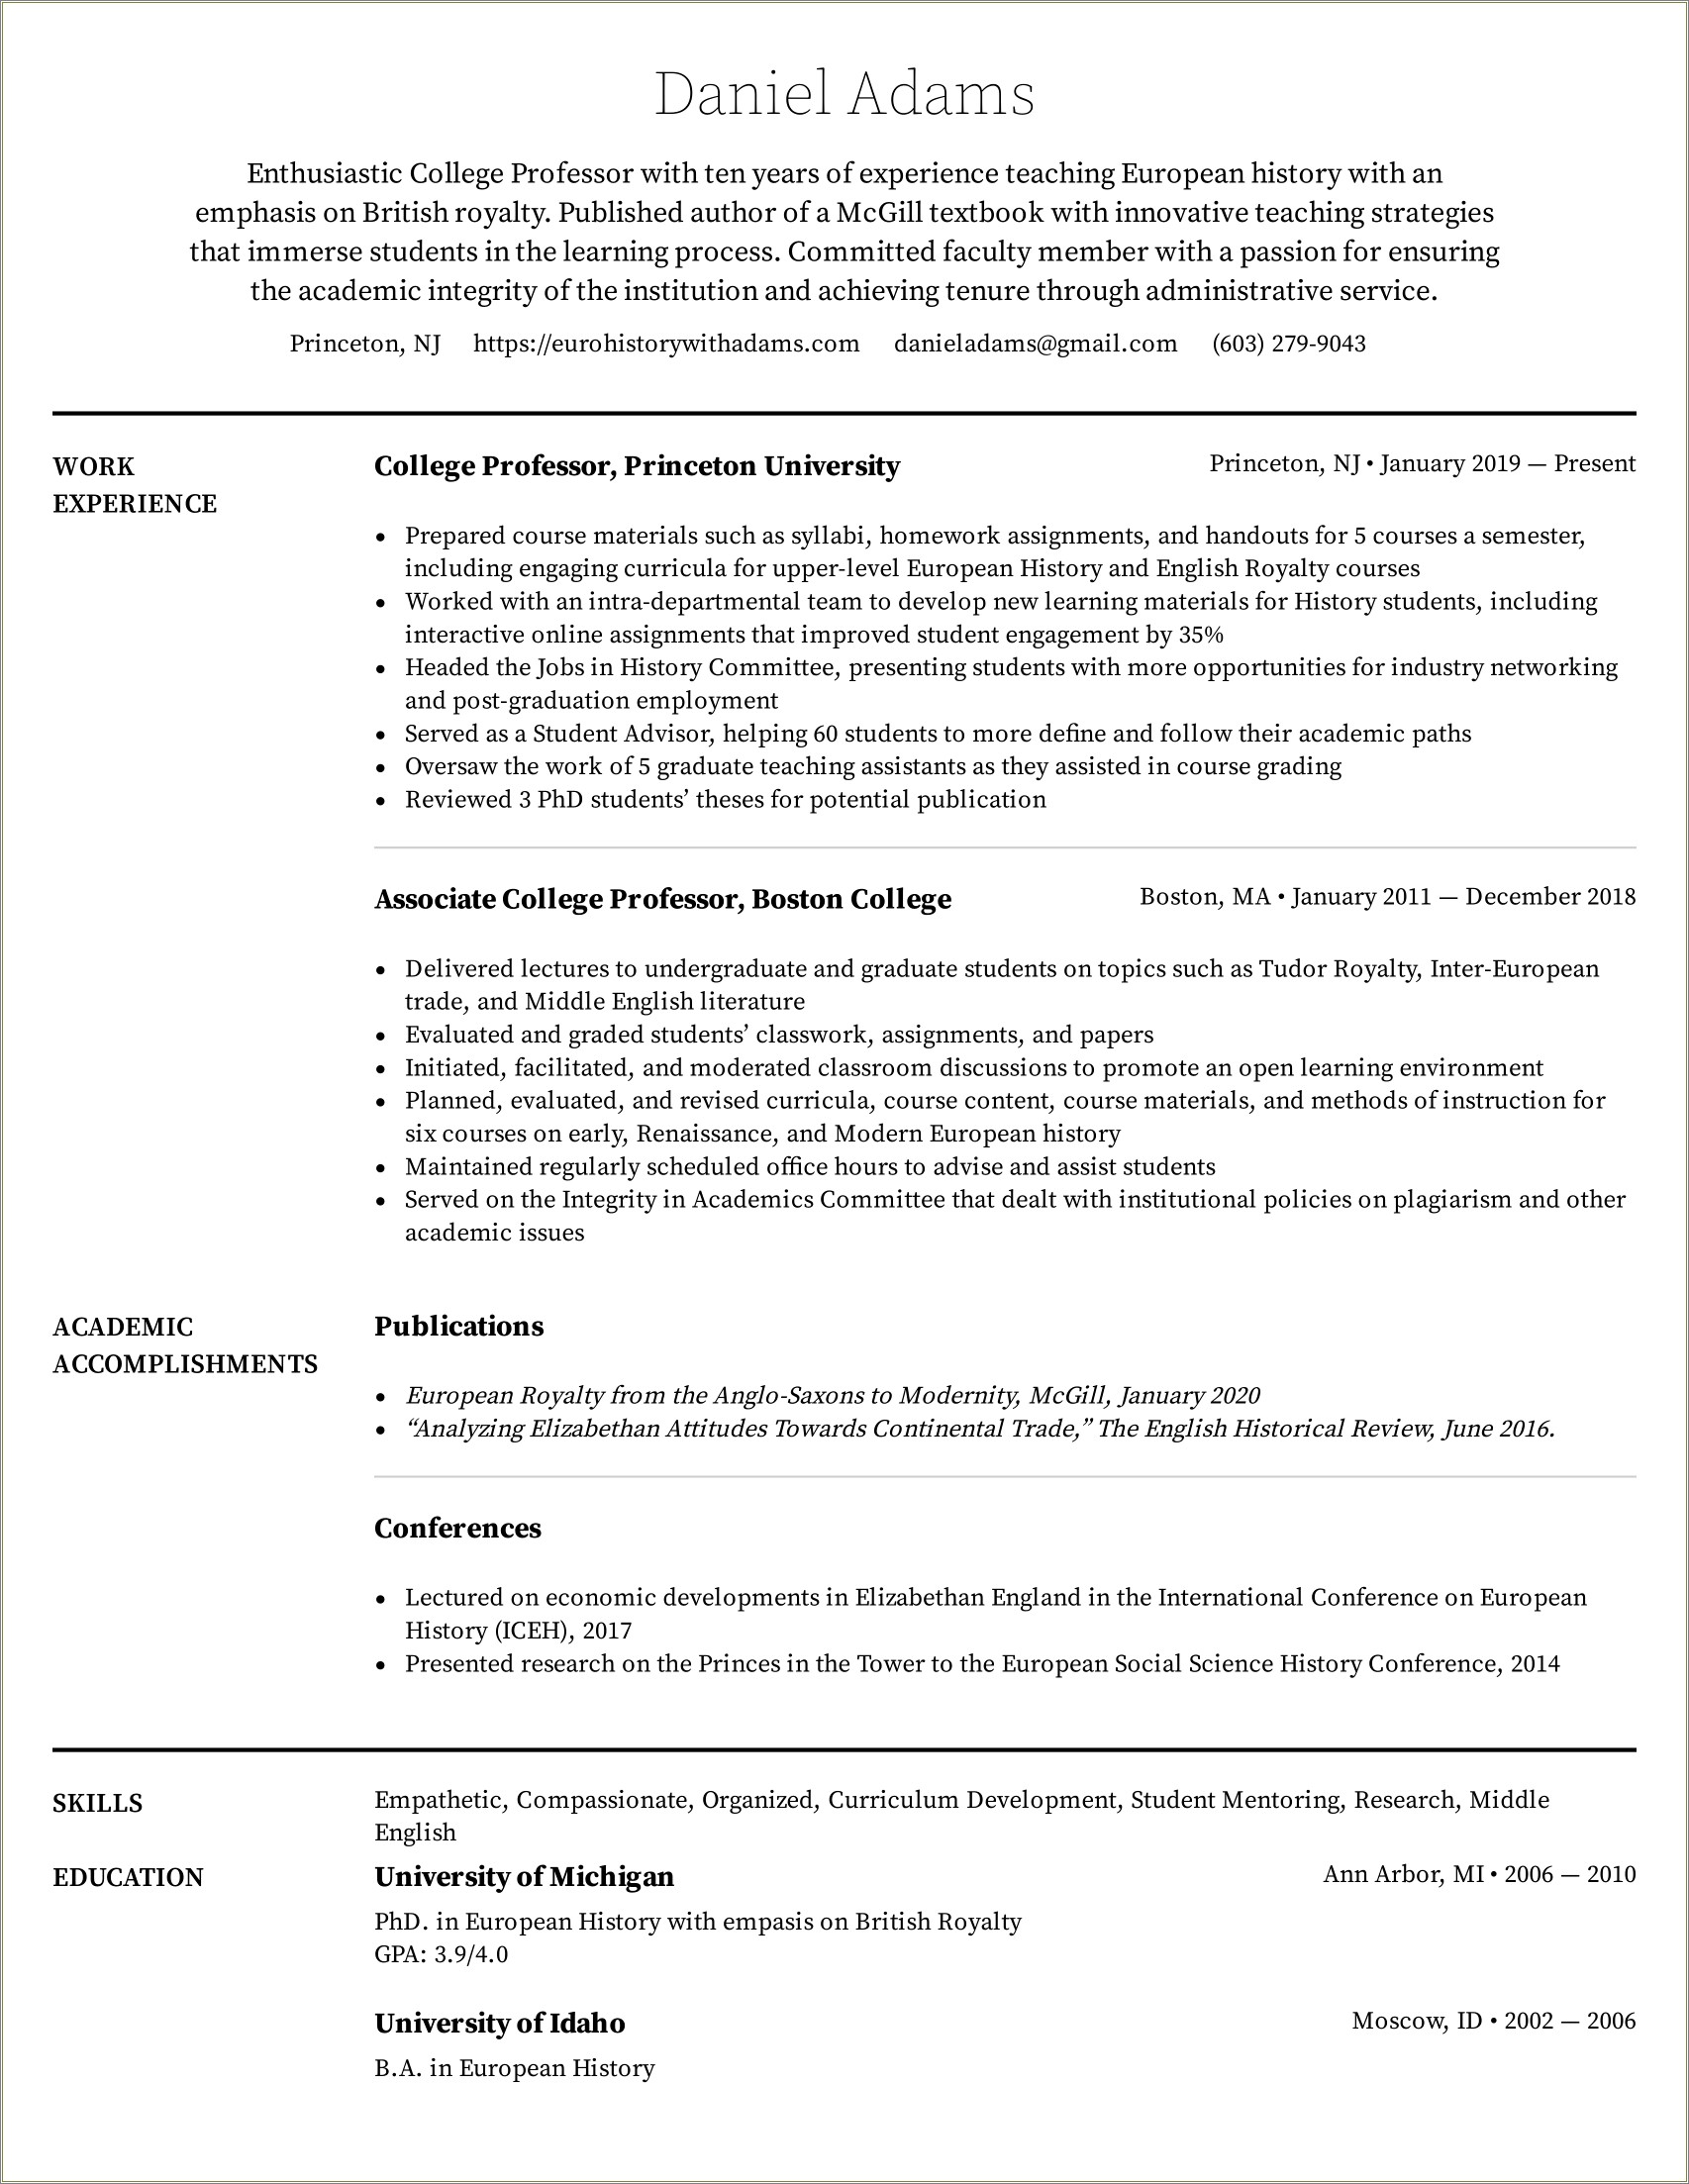 Resume For Professor Job With No Experience